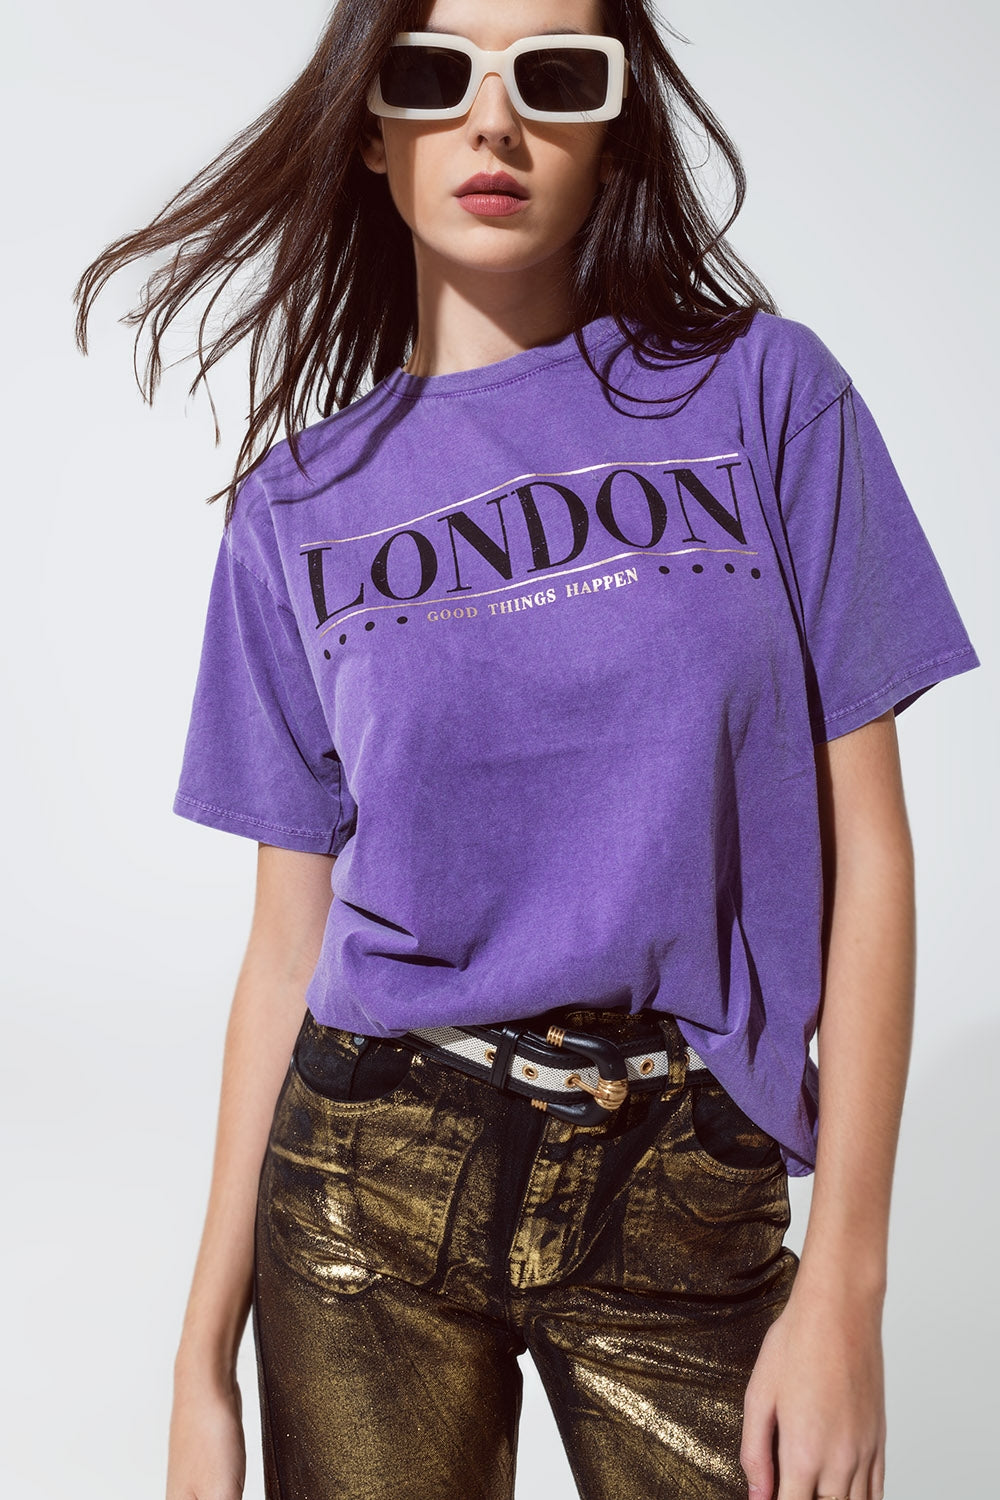 Q2 relaxed fit T-shirt in washed purple with london logo